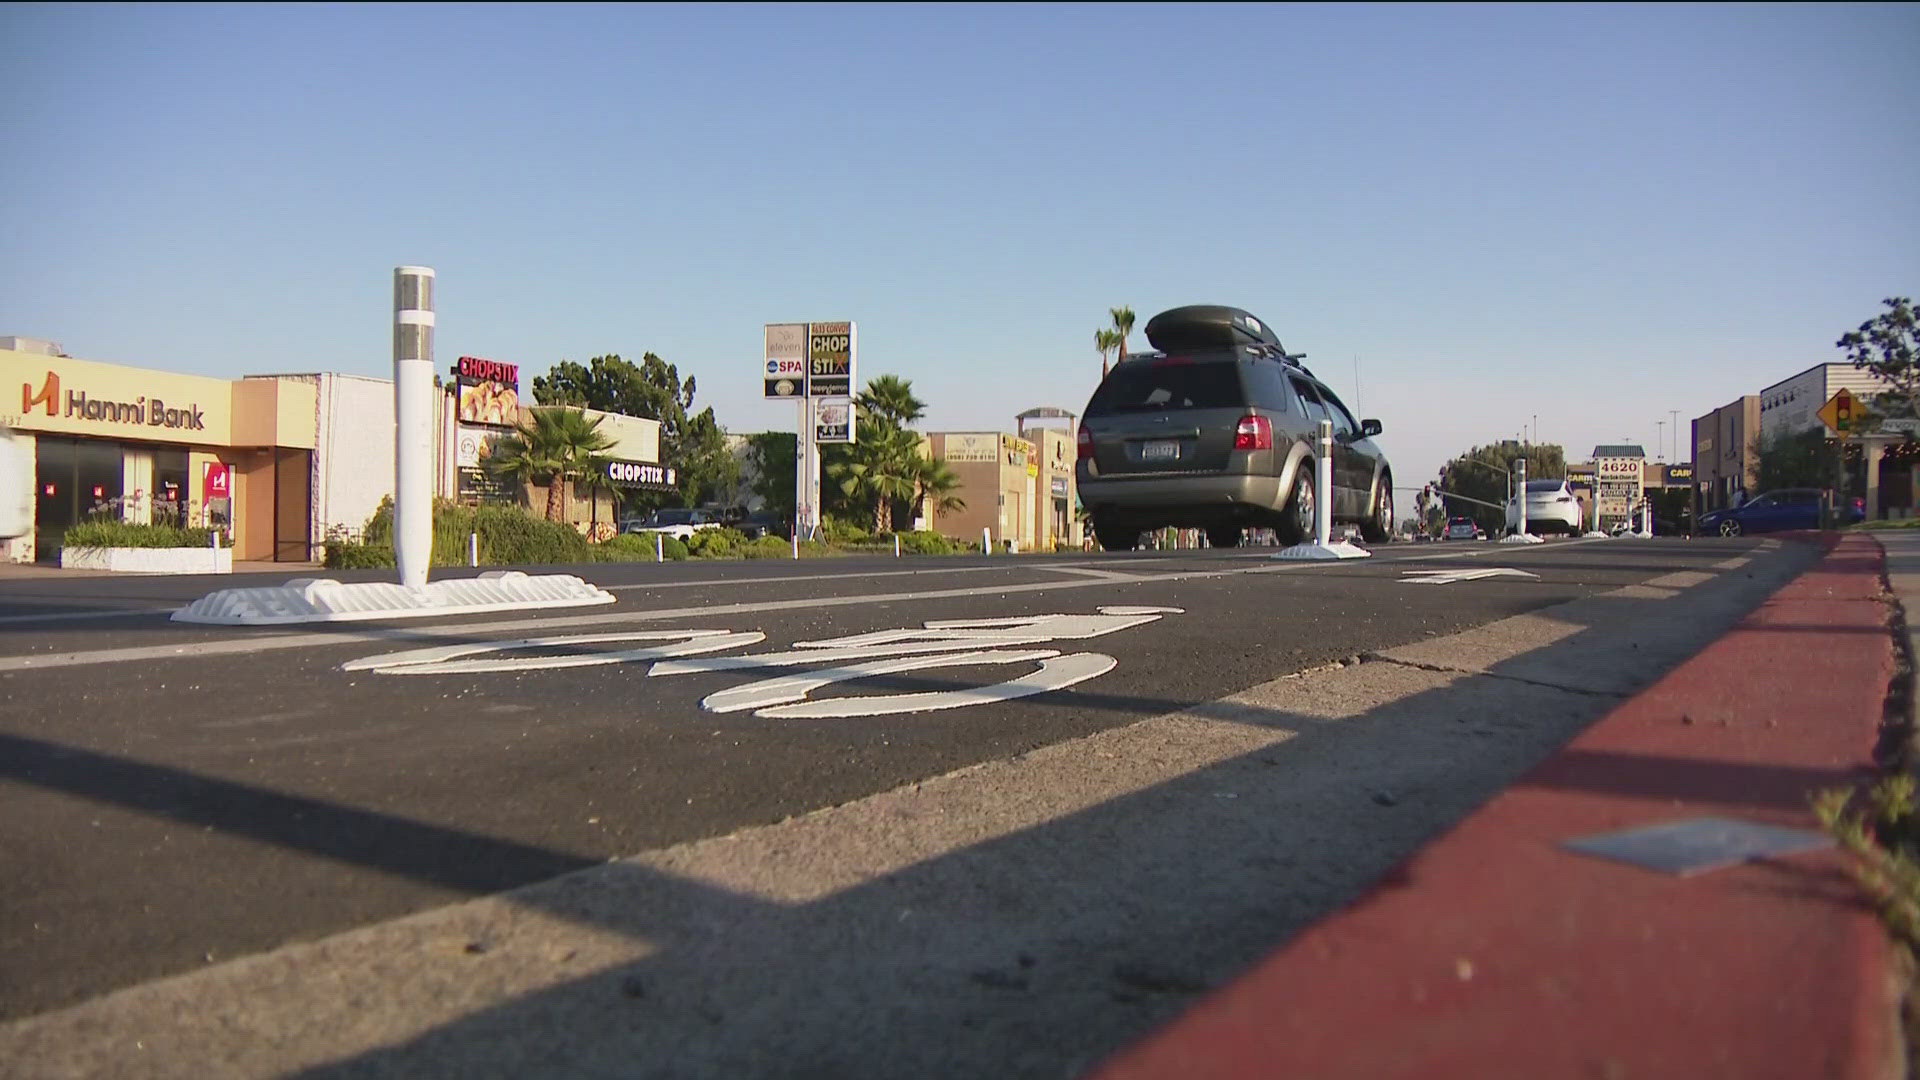 Restaurant goers say newly installed bike lanes took up an already limited amount of parking spots in the area.